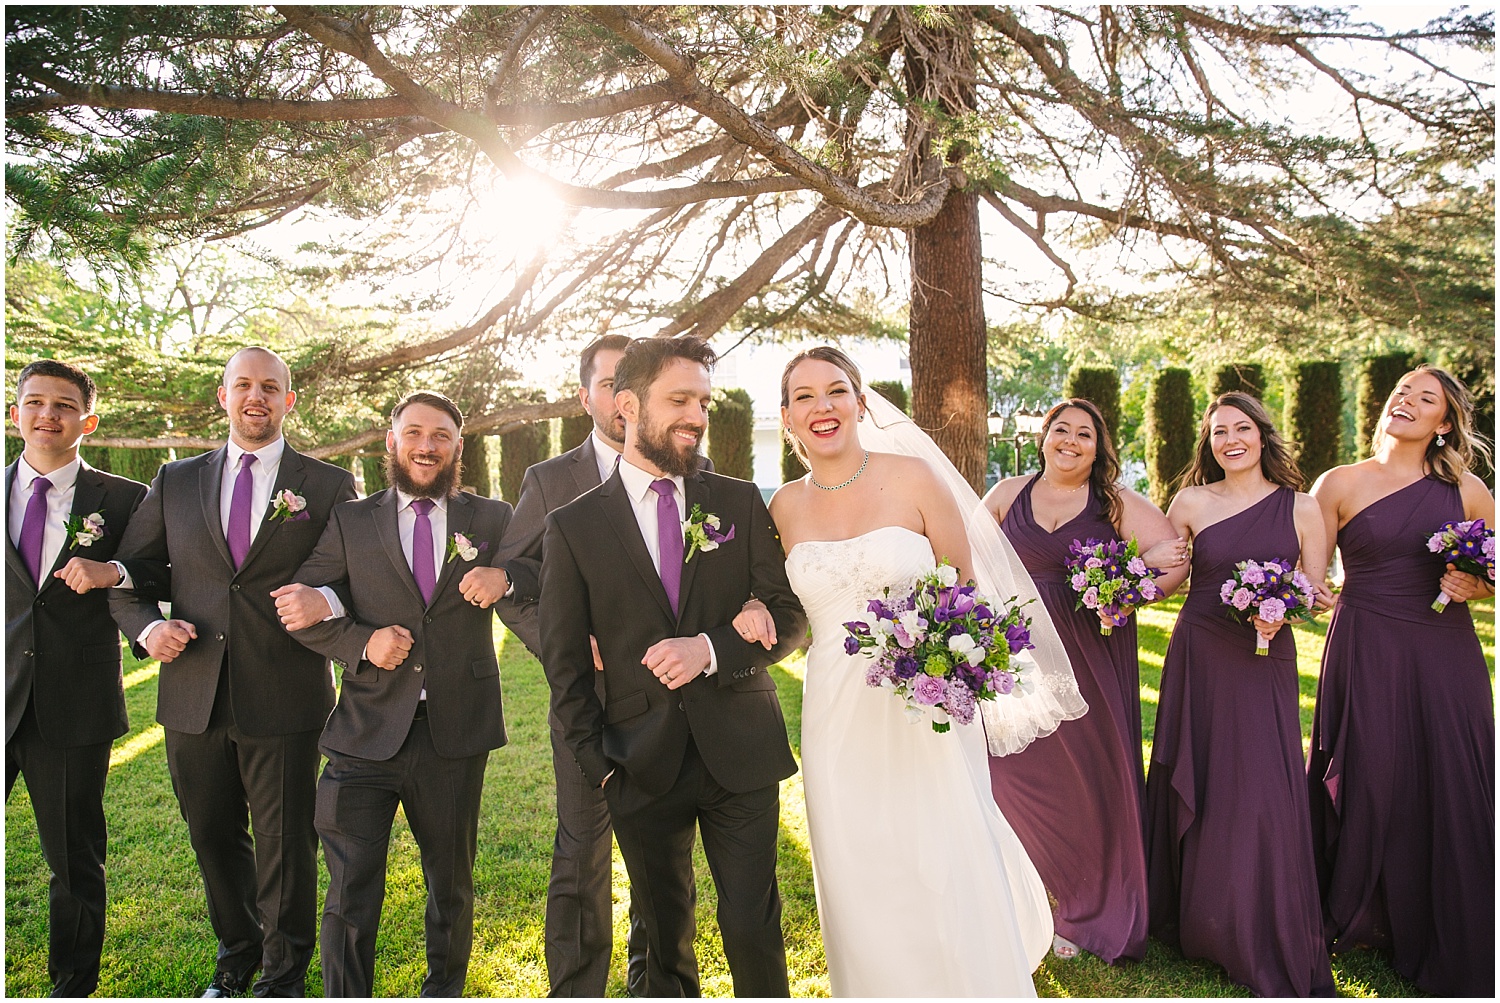 Wedding party dressed in black and purple at Jefferson Street Mansion wedding